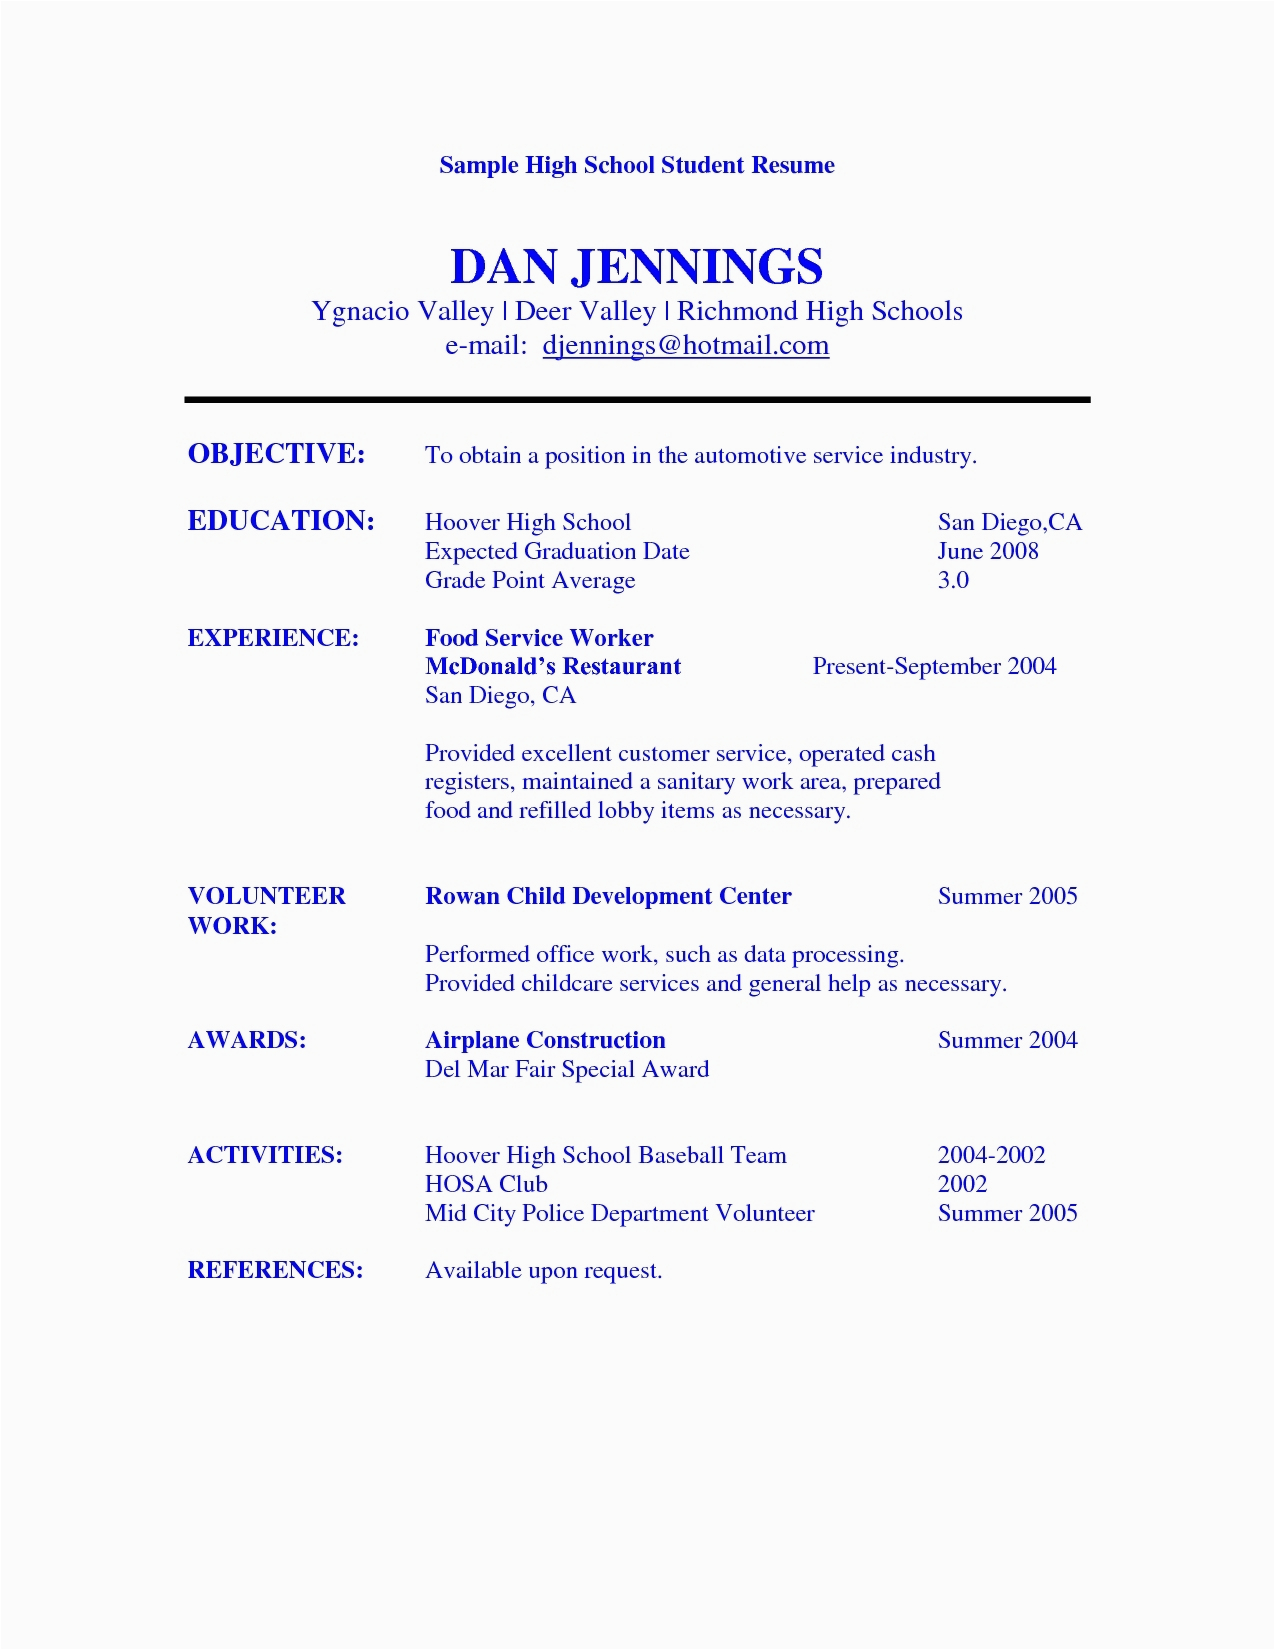 Sample Resume for Highschool Students with Volunteer Experience 10 Unique Volunteer Ideas for Highschool Students 2021